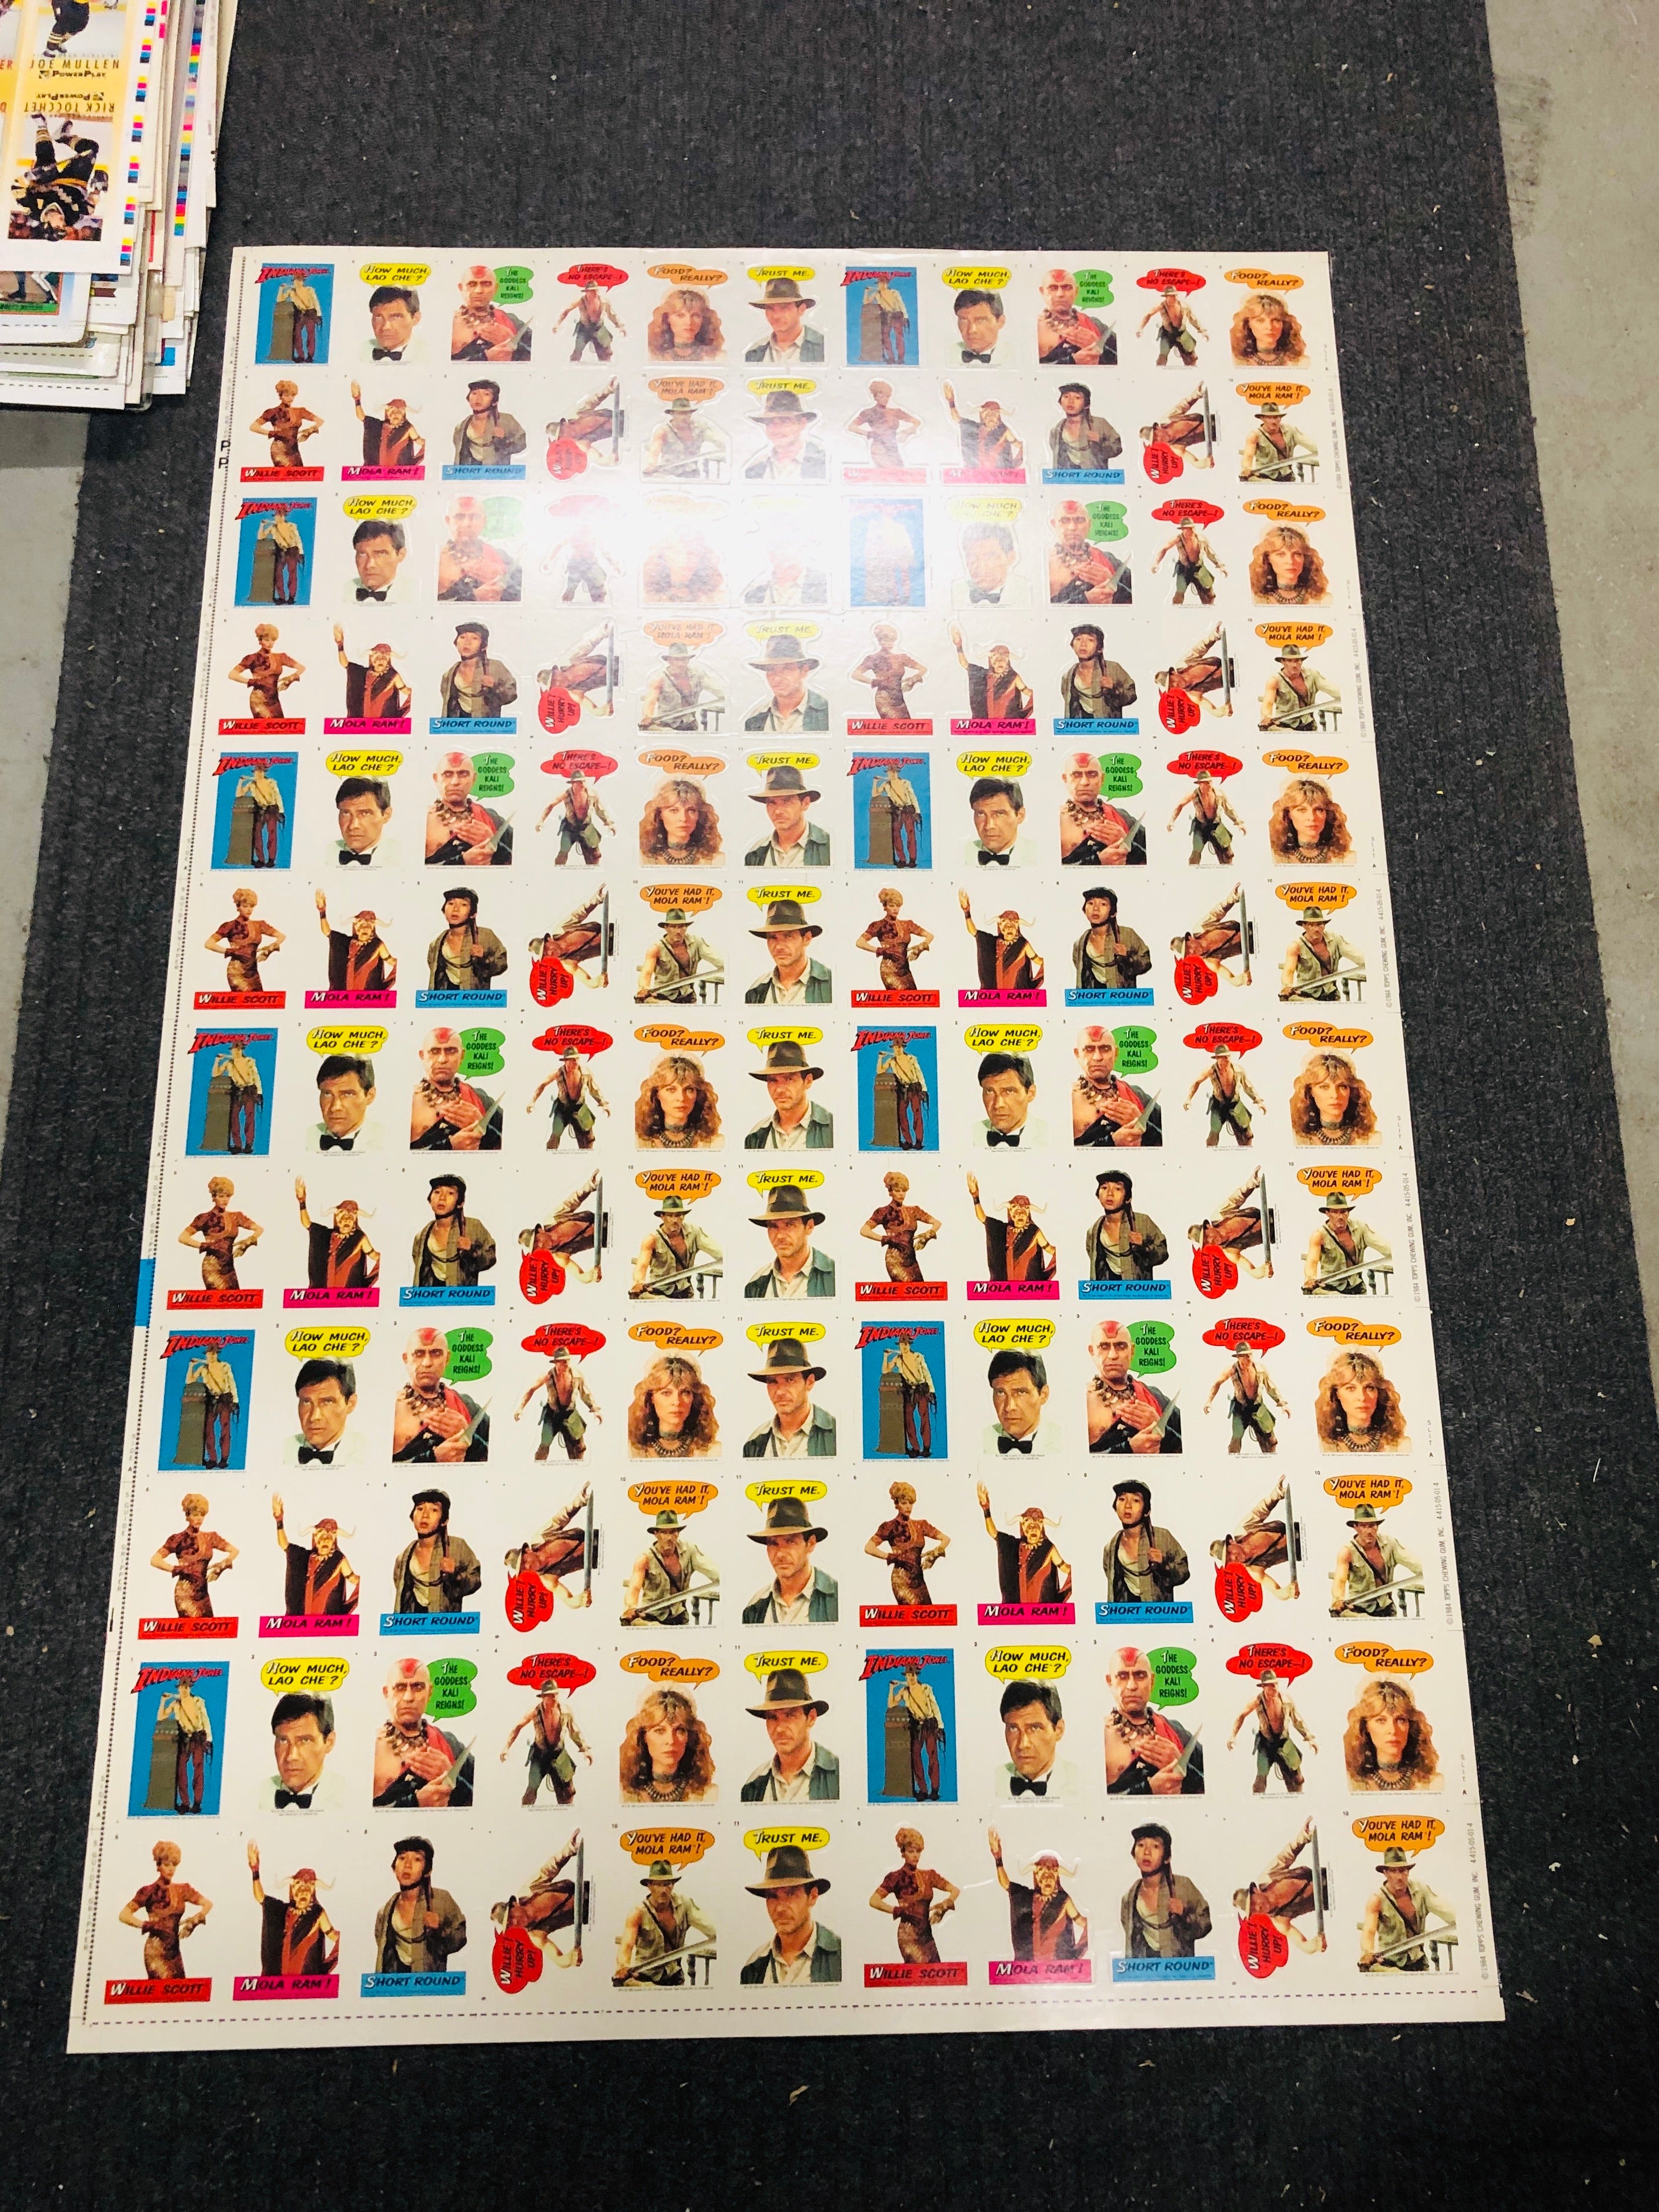 1984 Topps Indiana Jones and the Temple of Doom movie stickers uncut sheet